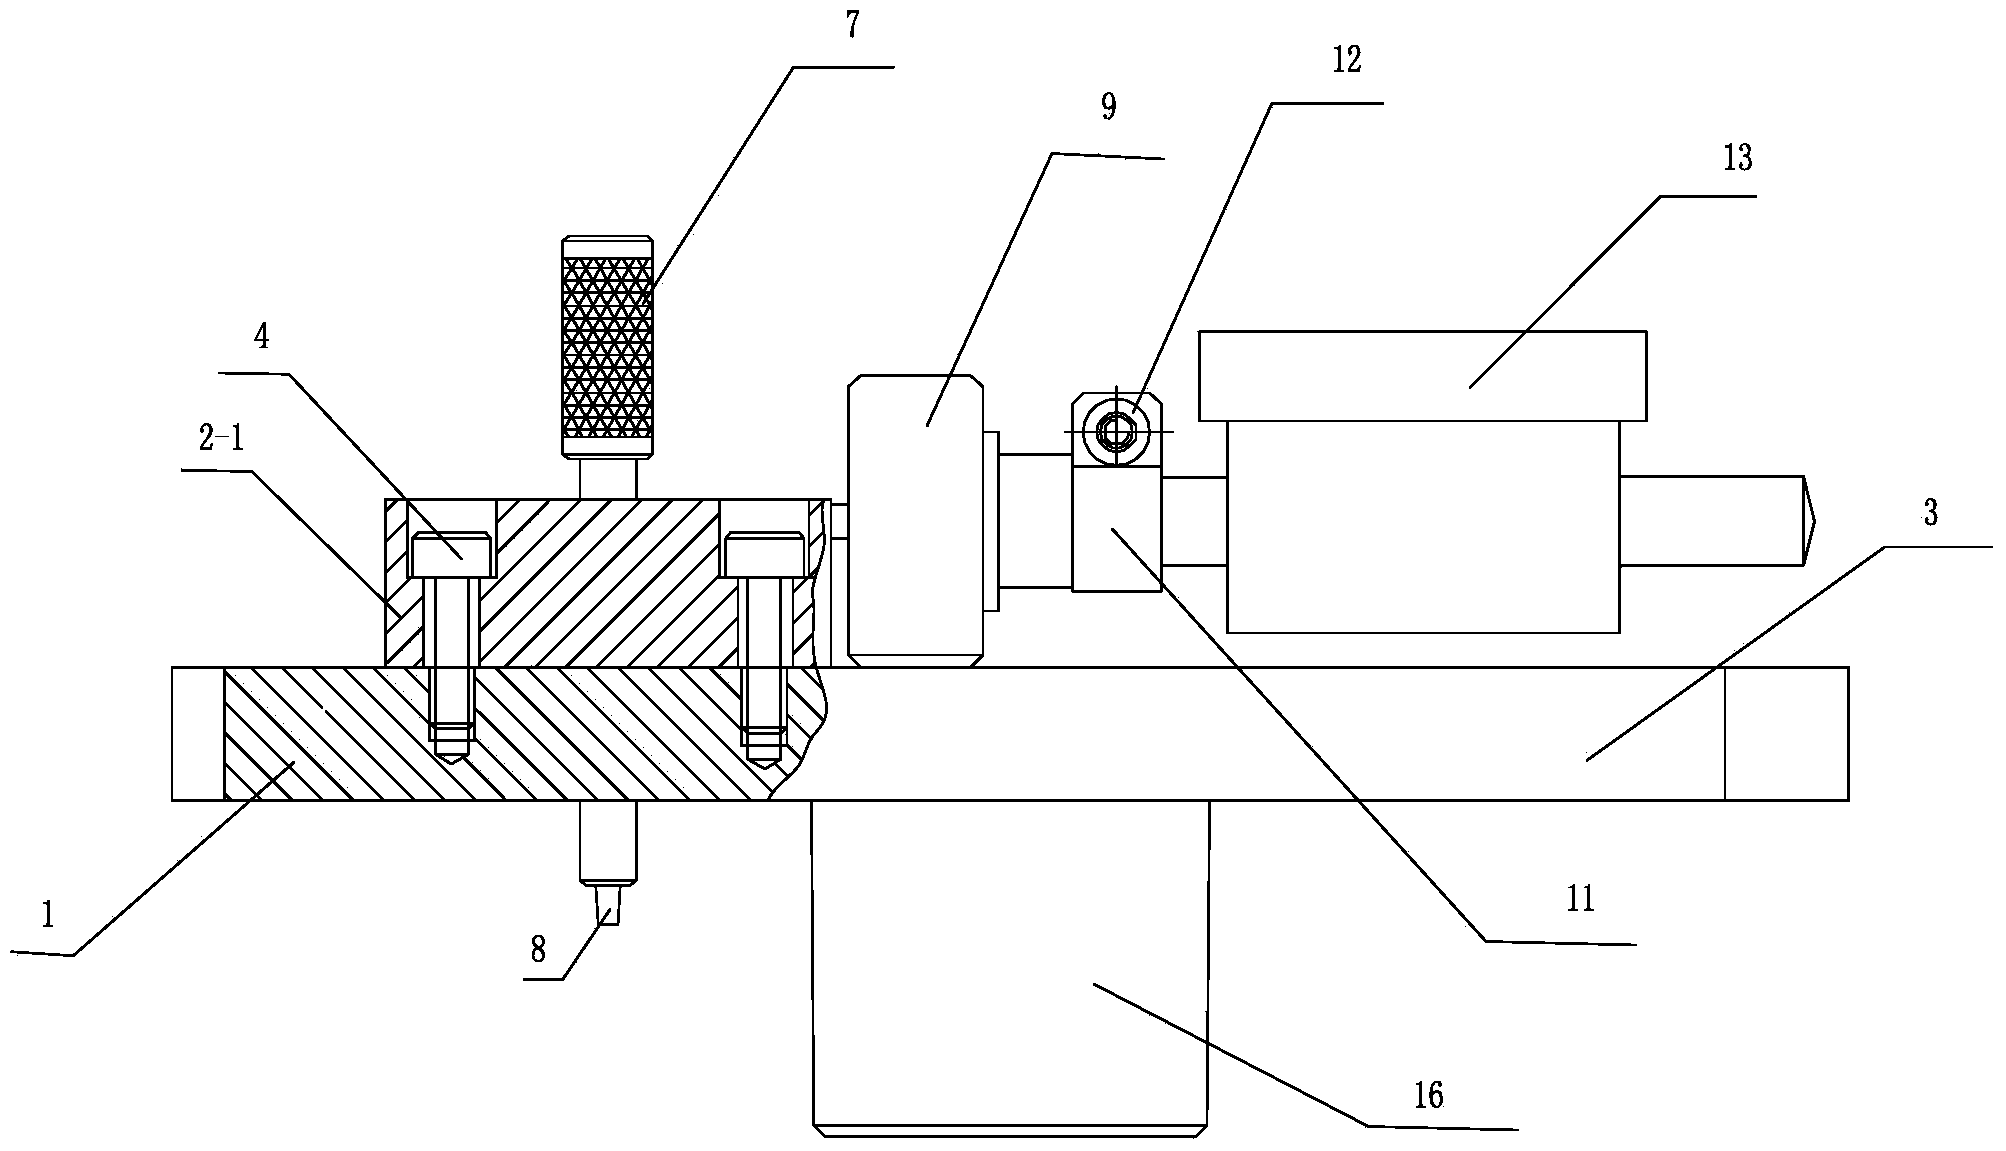 Pitch-row gauge capable of being read